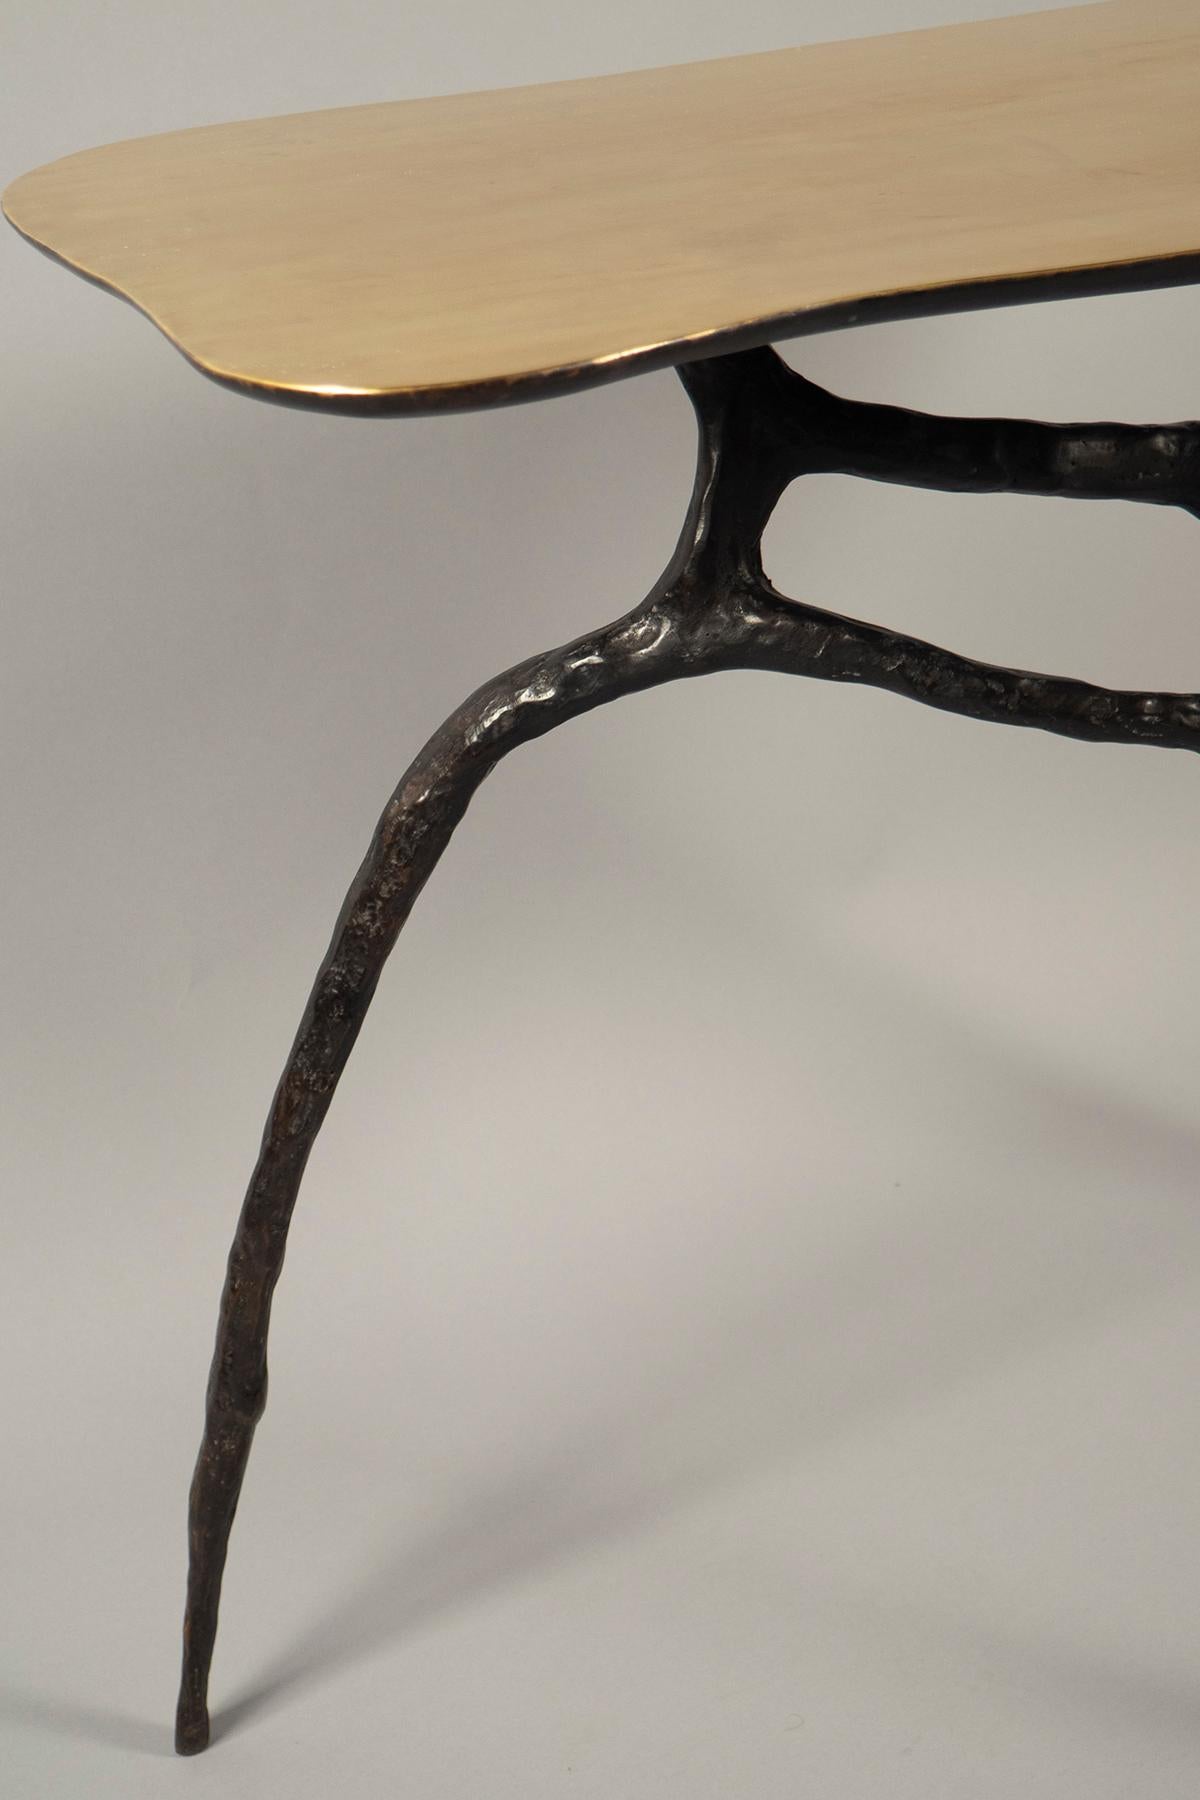 Black patinated bronze freeform base, supporting a polished bronze top.
  